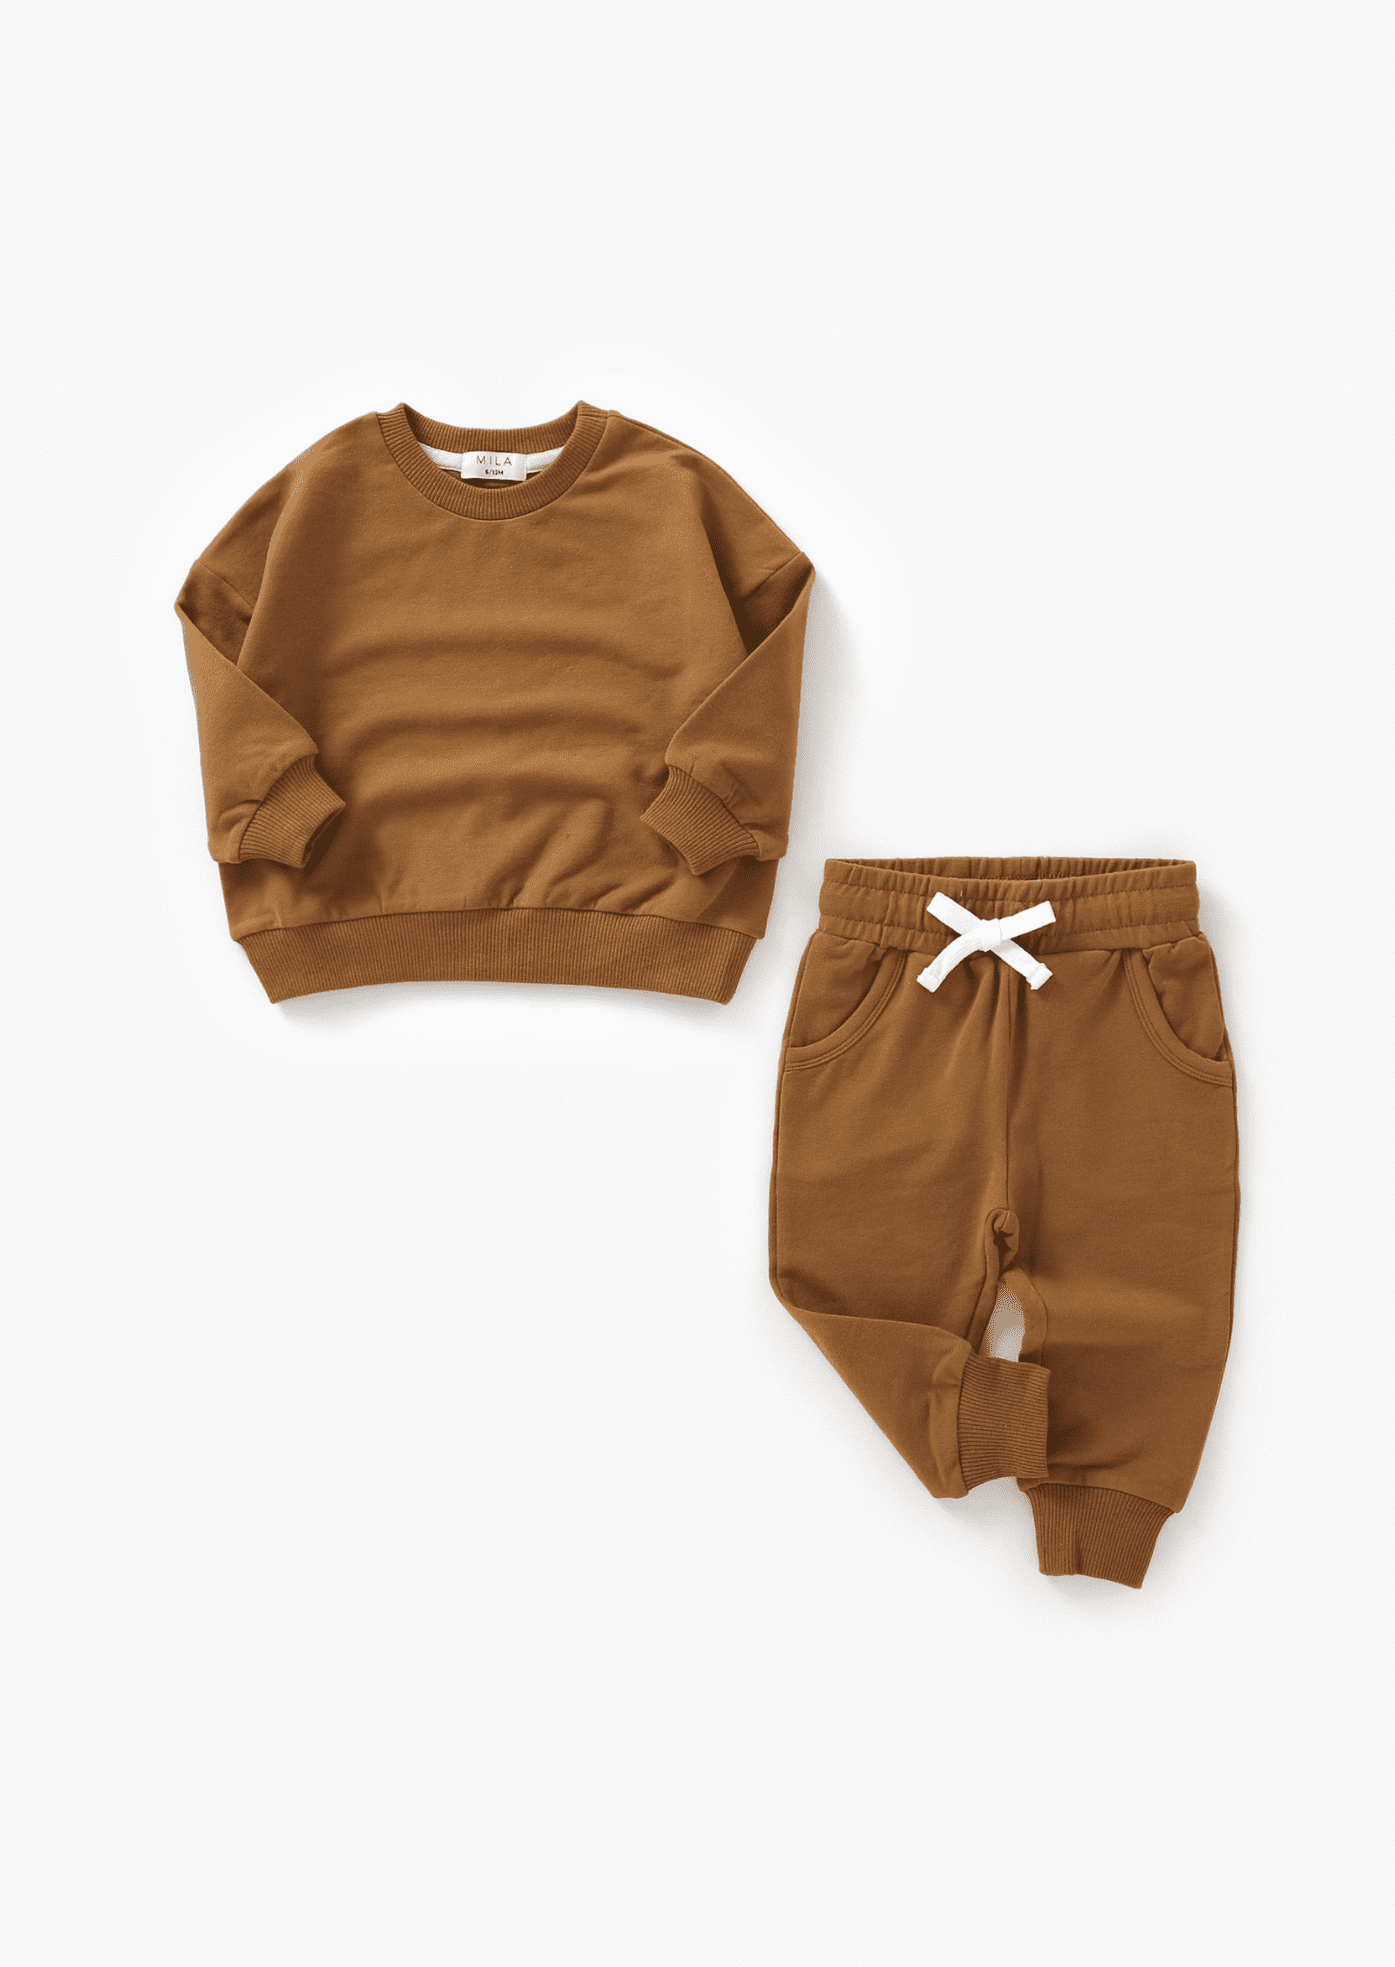 Shop Baby & Toddler Two-Piece Sets – Mila & Co.